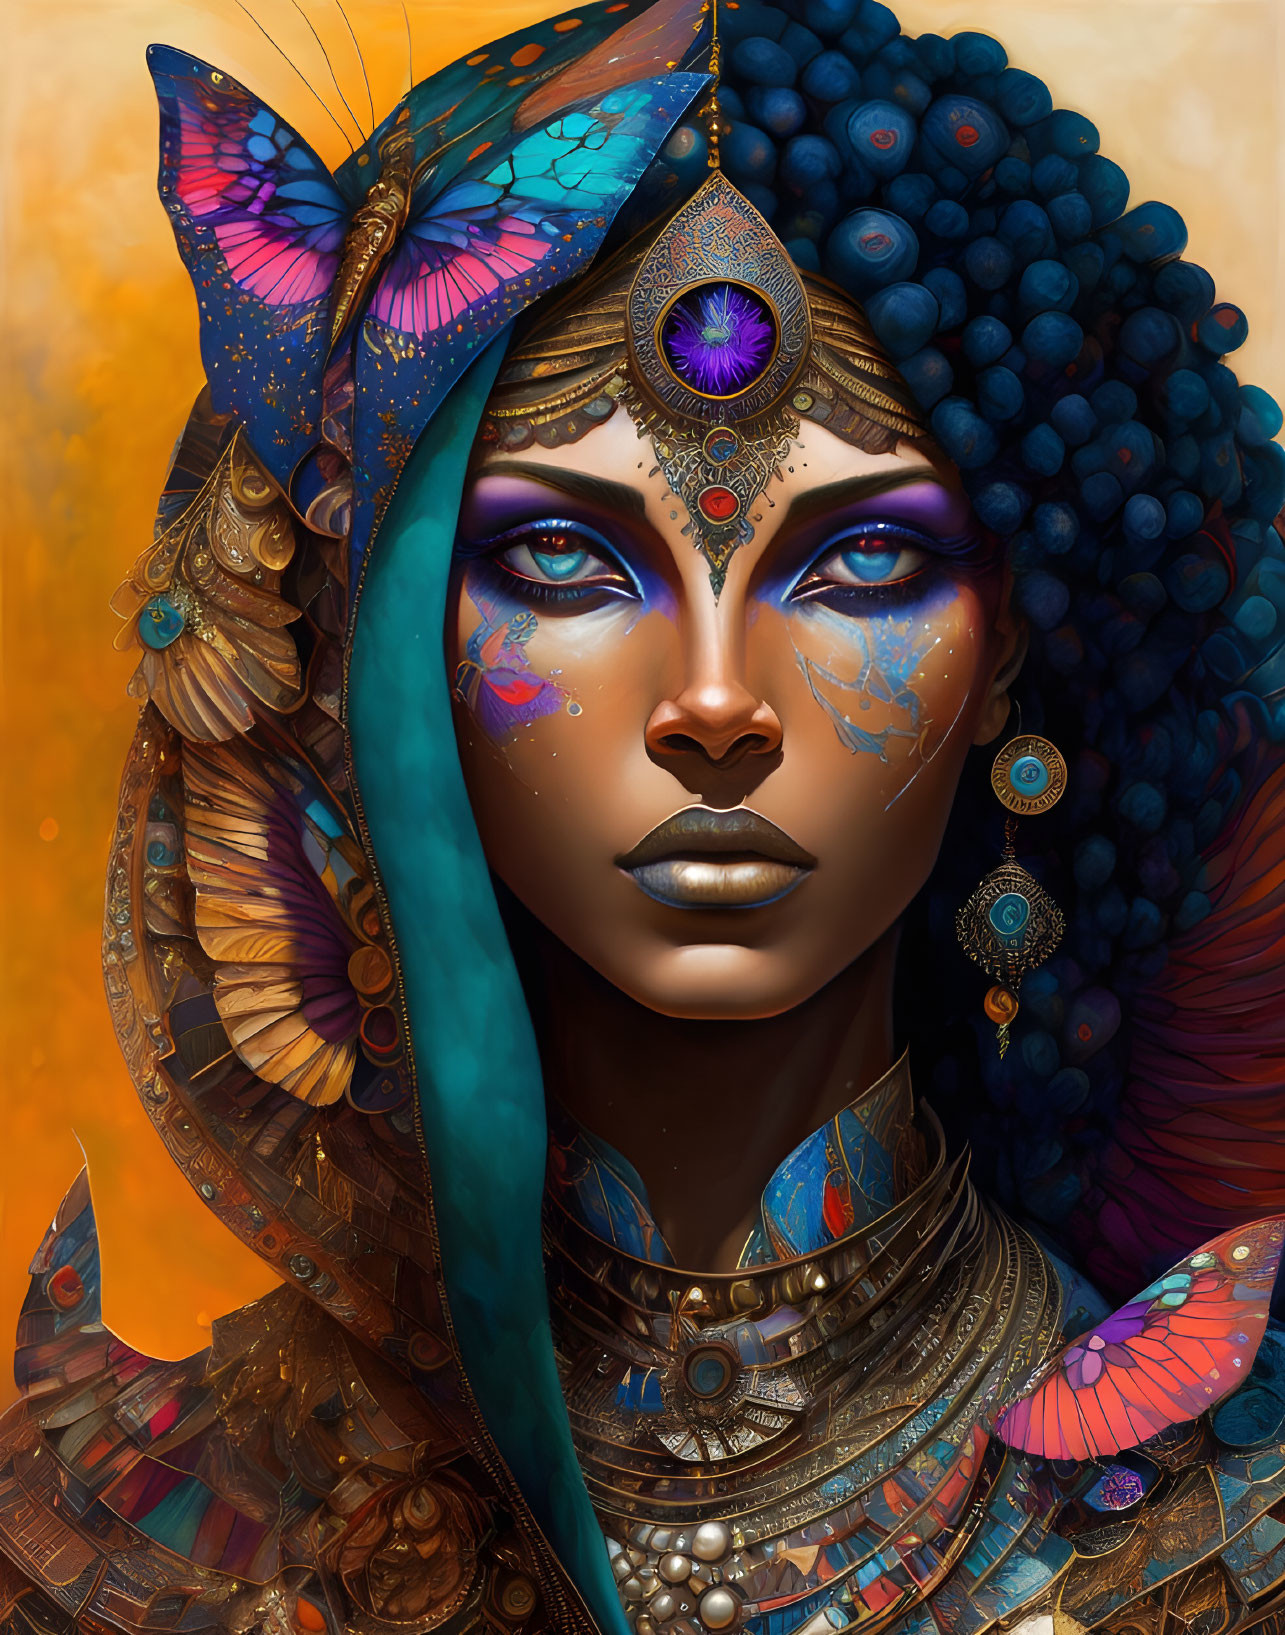 Blue-skinned woman with elaborate headdress and butterfly decorations.